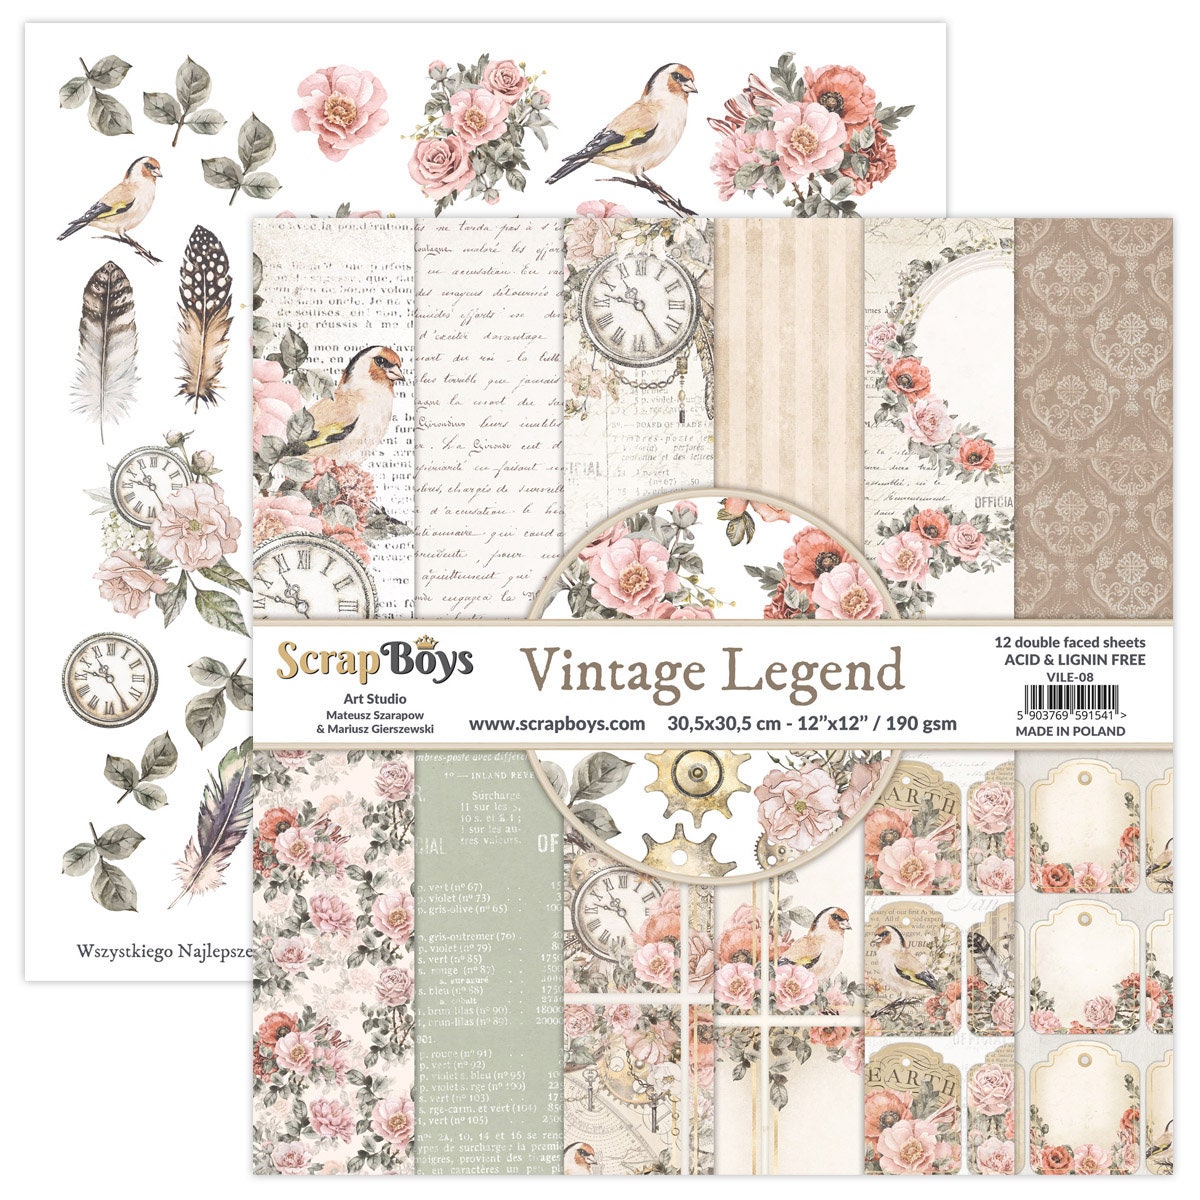 Crafter's Companion 12x12 Pearl Paper Pad: Ditsy Floral (AD12DIFL)